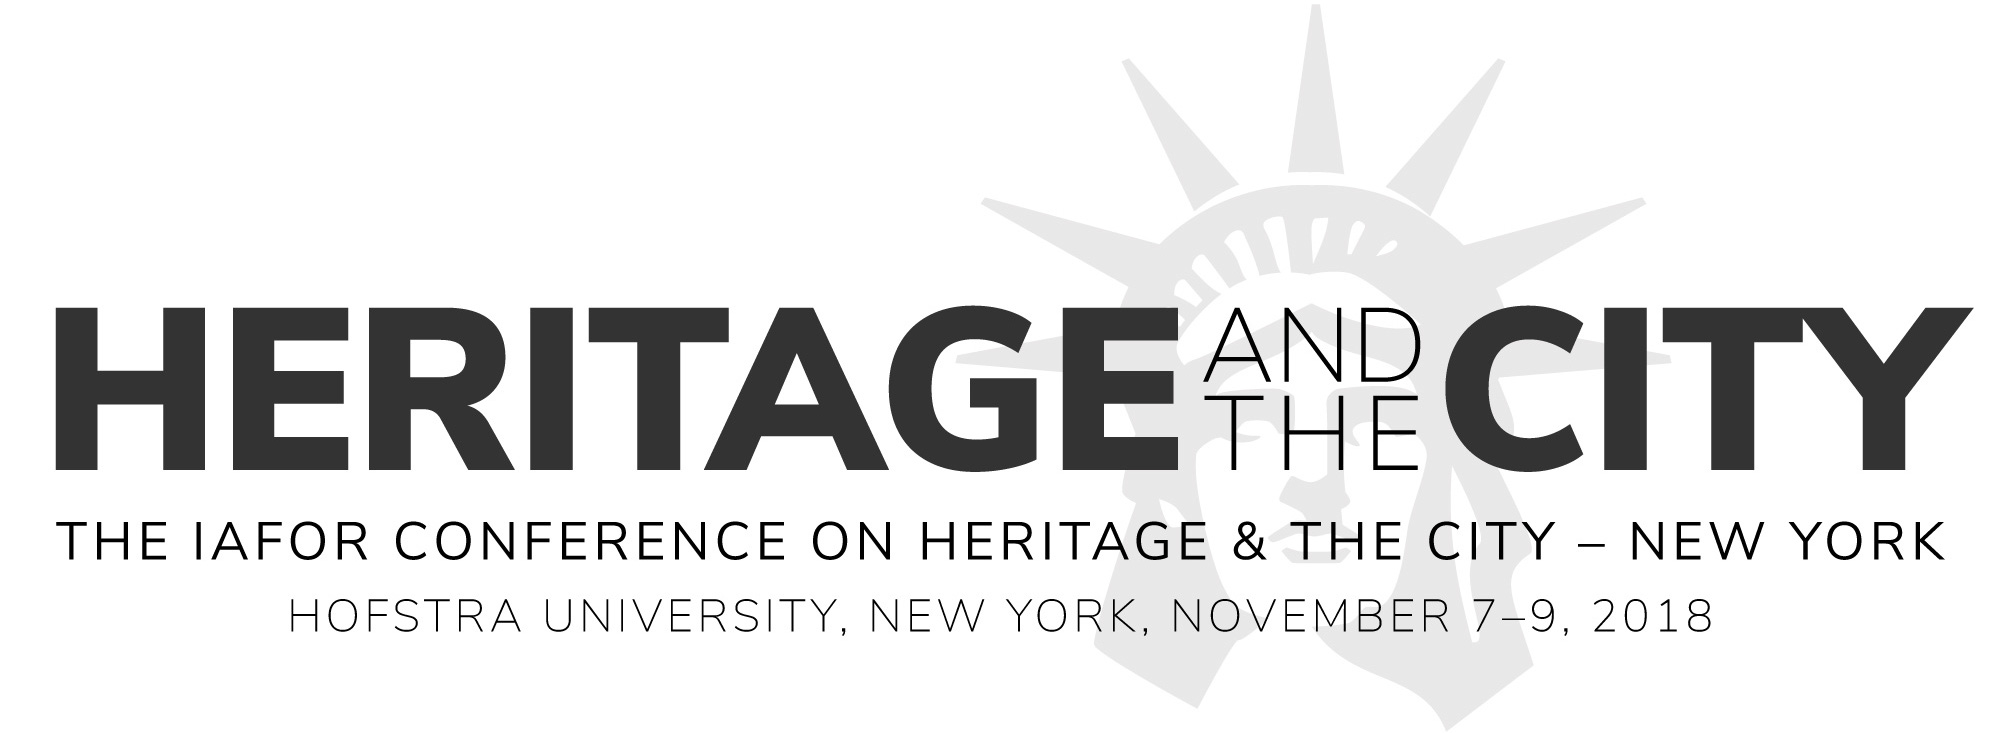 The IAFOR Conference on Heritage & the City – New York